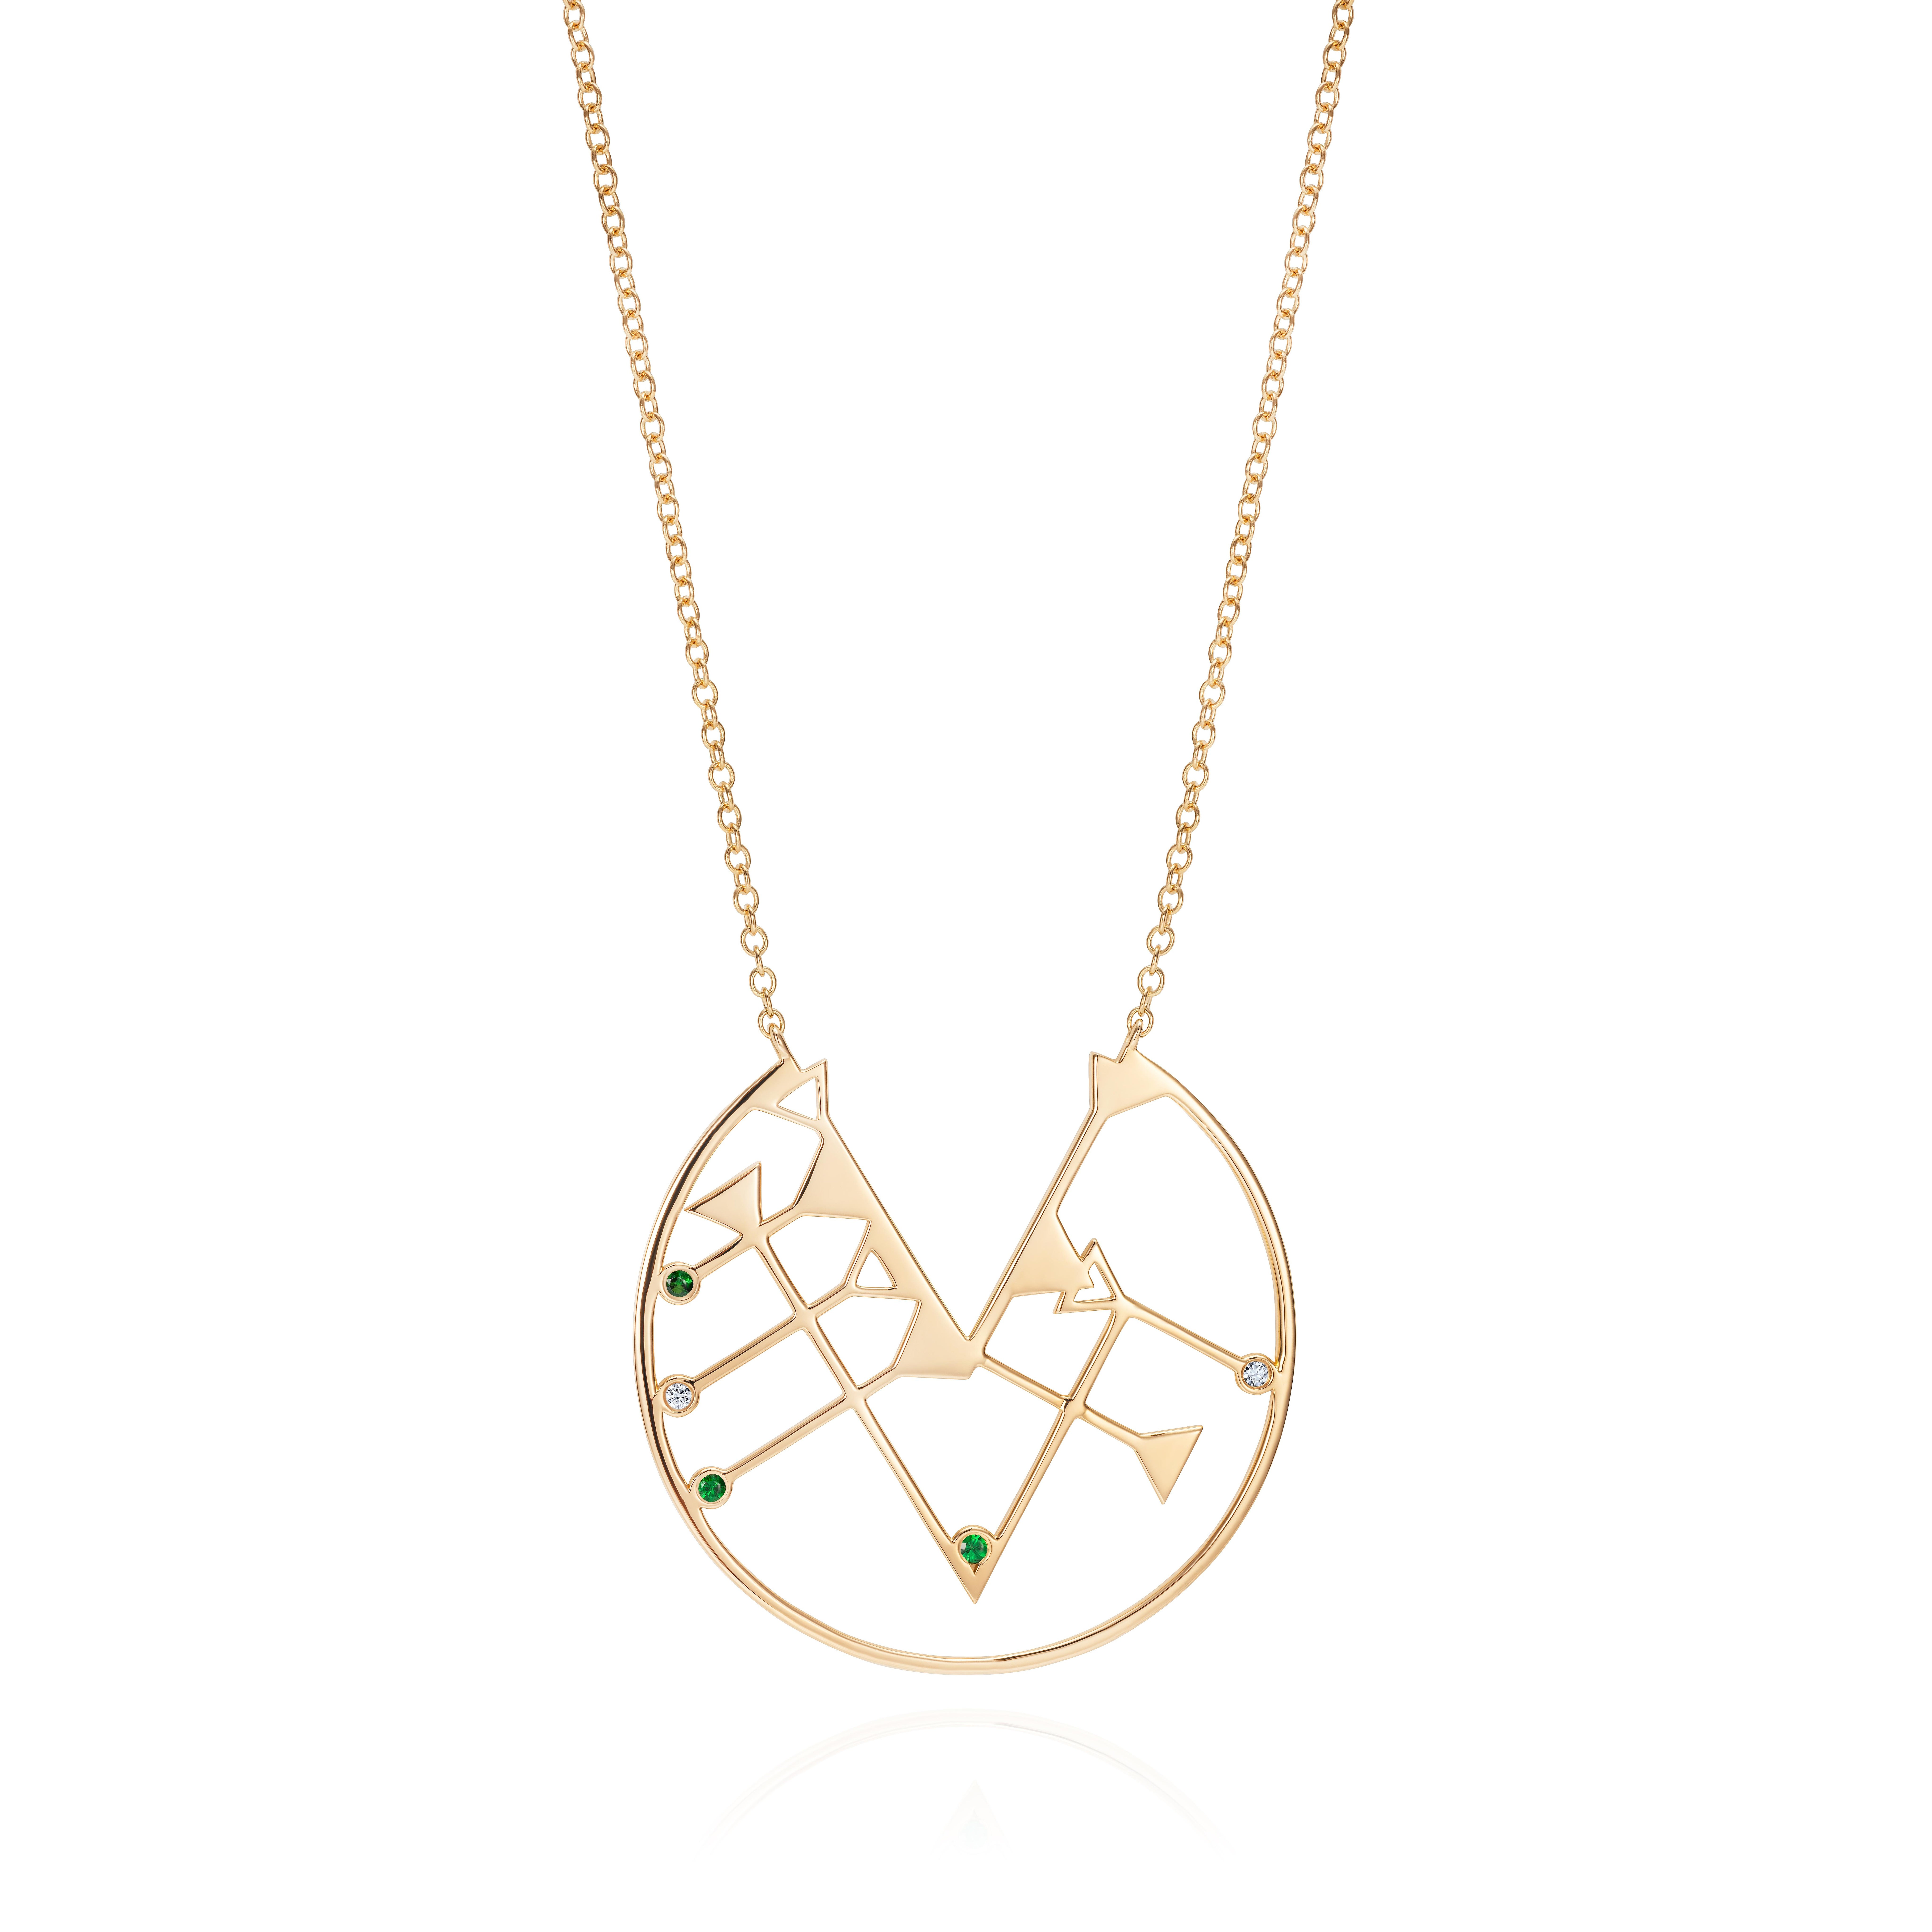 18 Karat Yellow Gold Pendant Set With Diamonds and Tsavorites

This yellow gold pendant is part of the Babylon collection. The design of this extraordinary collection has been influenced by the world's earliest writing system which evolved in